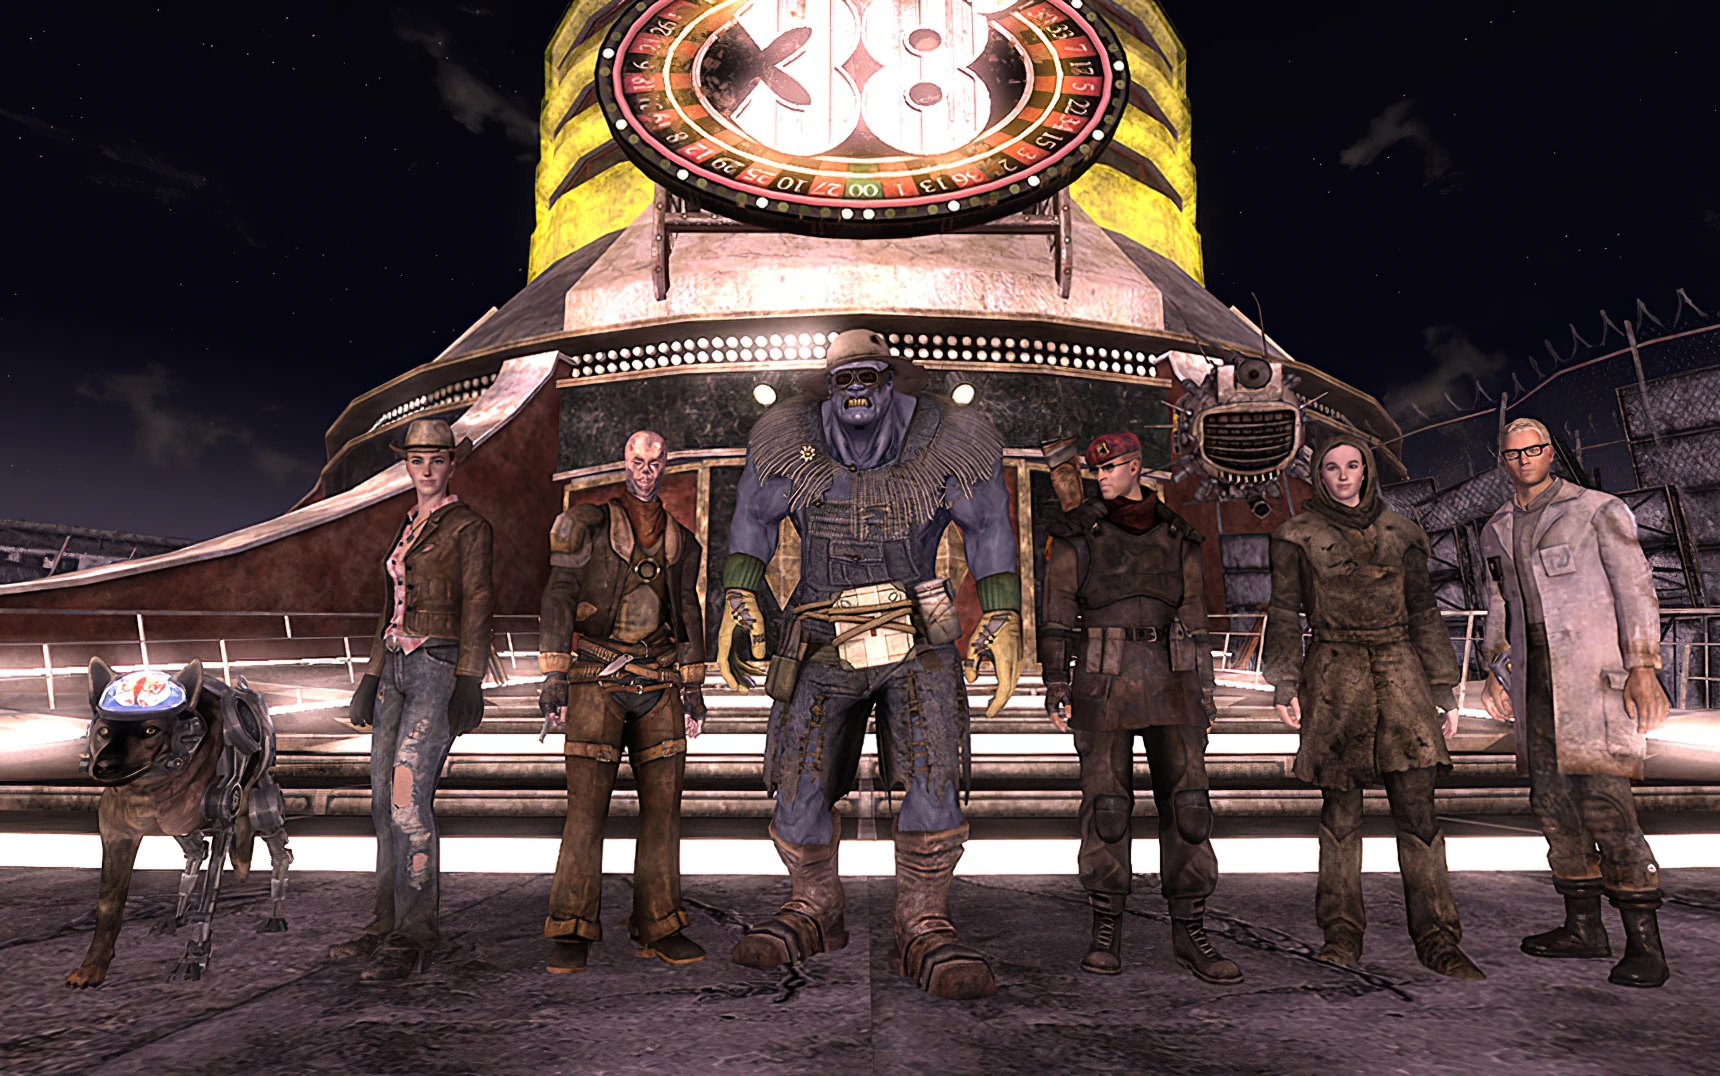 Limitless Stats at Fallout New Vegas - mods and community